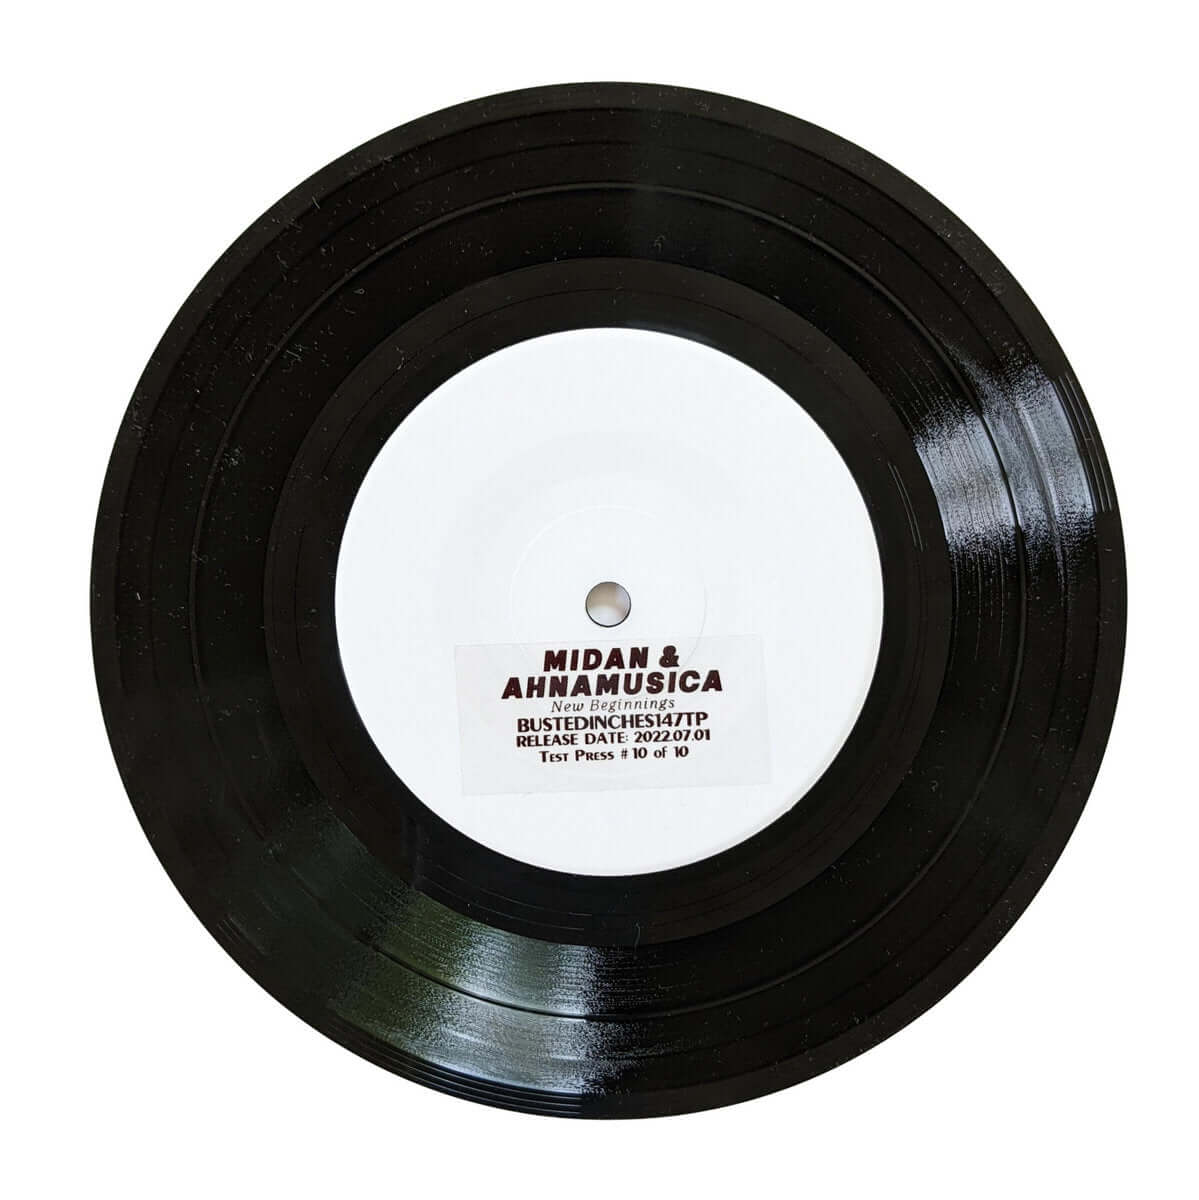 Midan & AHNAMUSICA - New Beginnings - Limited Edition 7 Inch Vinyl Test Pressing - Cold Busted